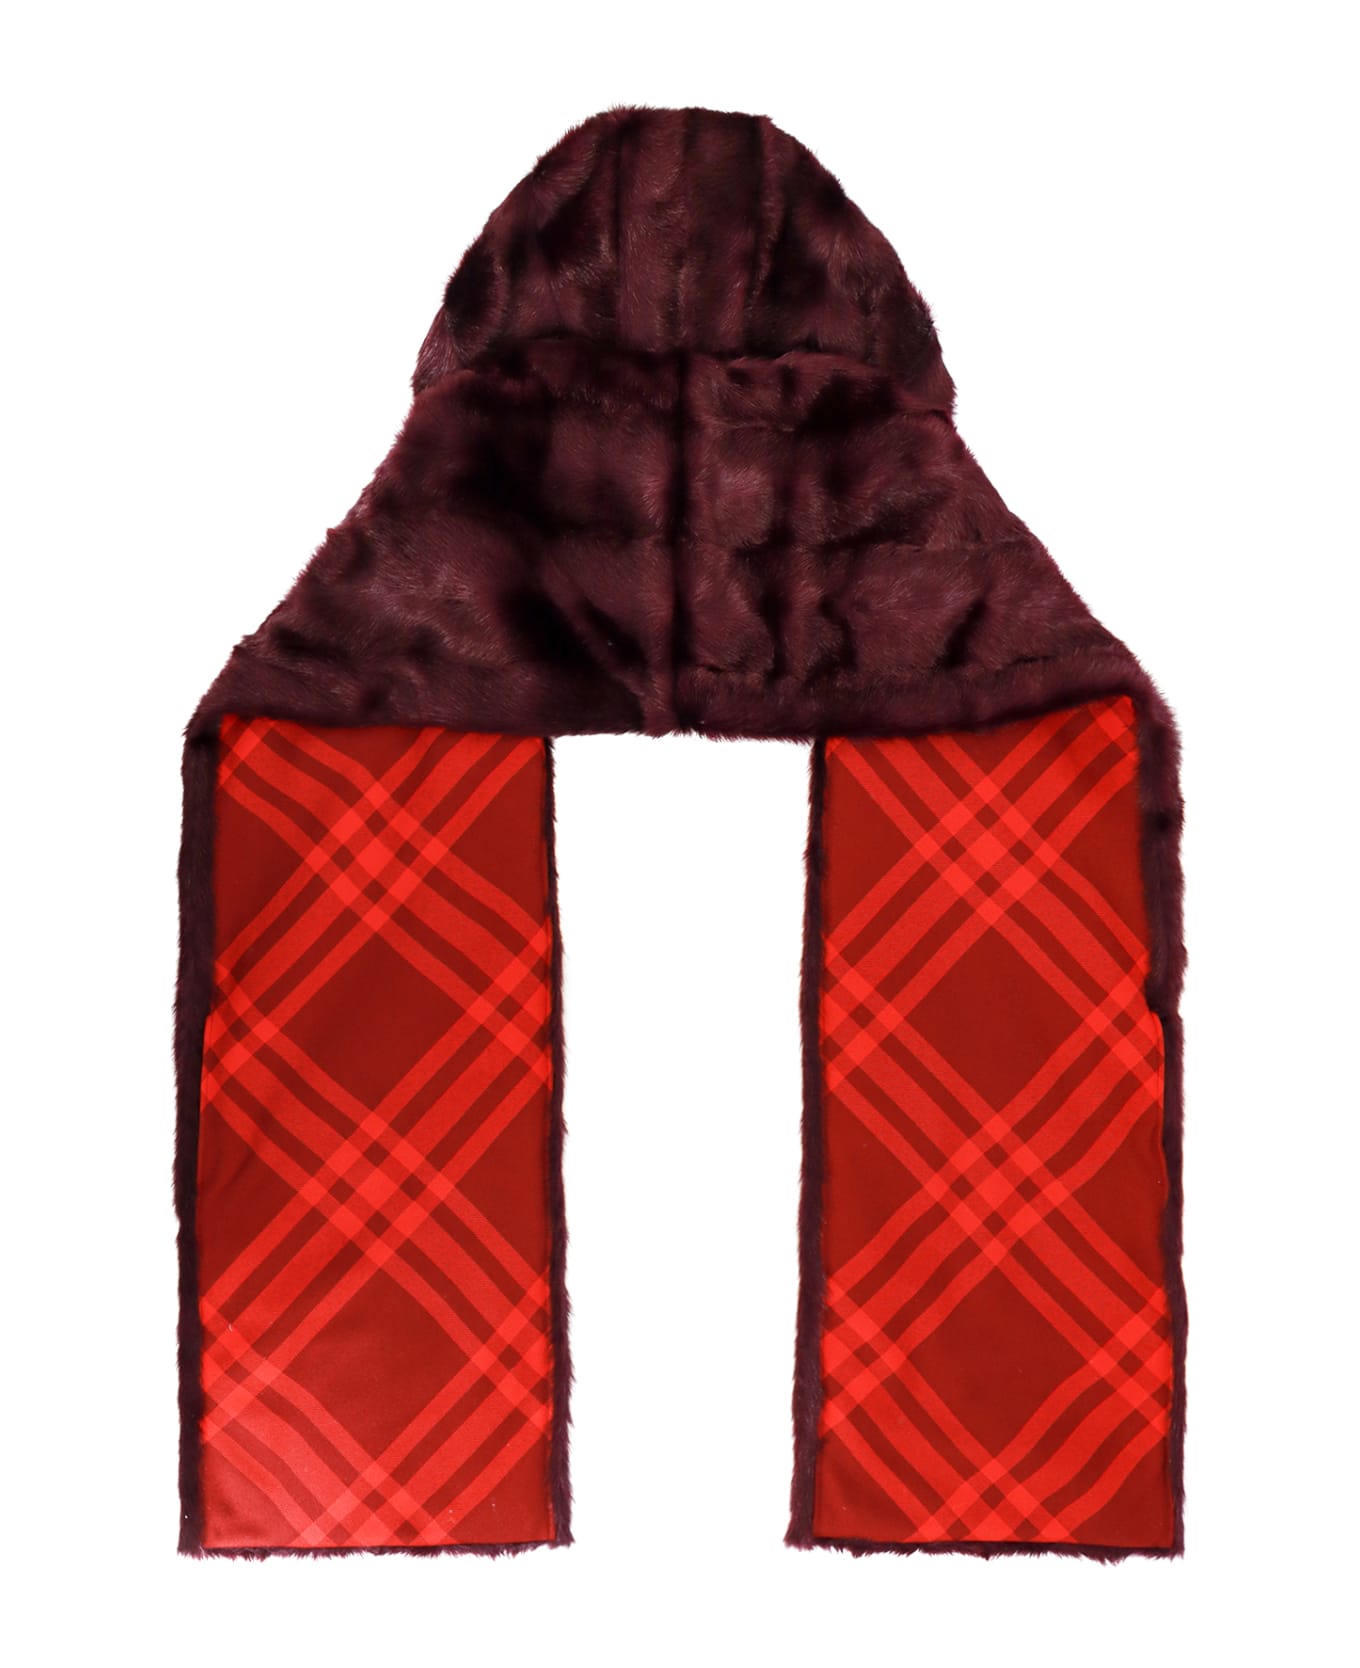 Burberry Scarf - Red スカーフ